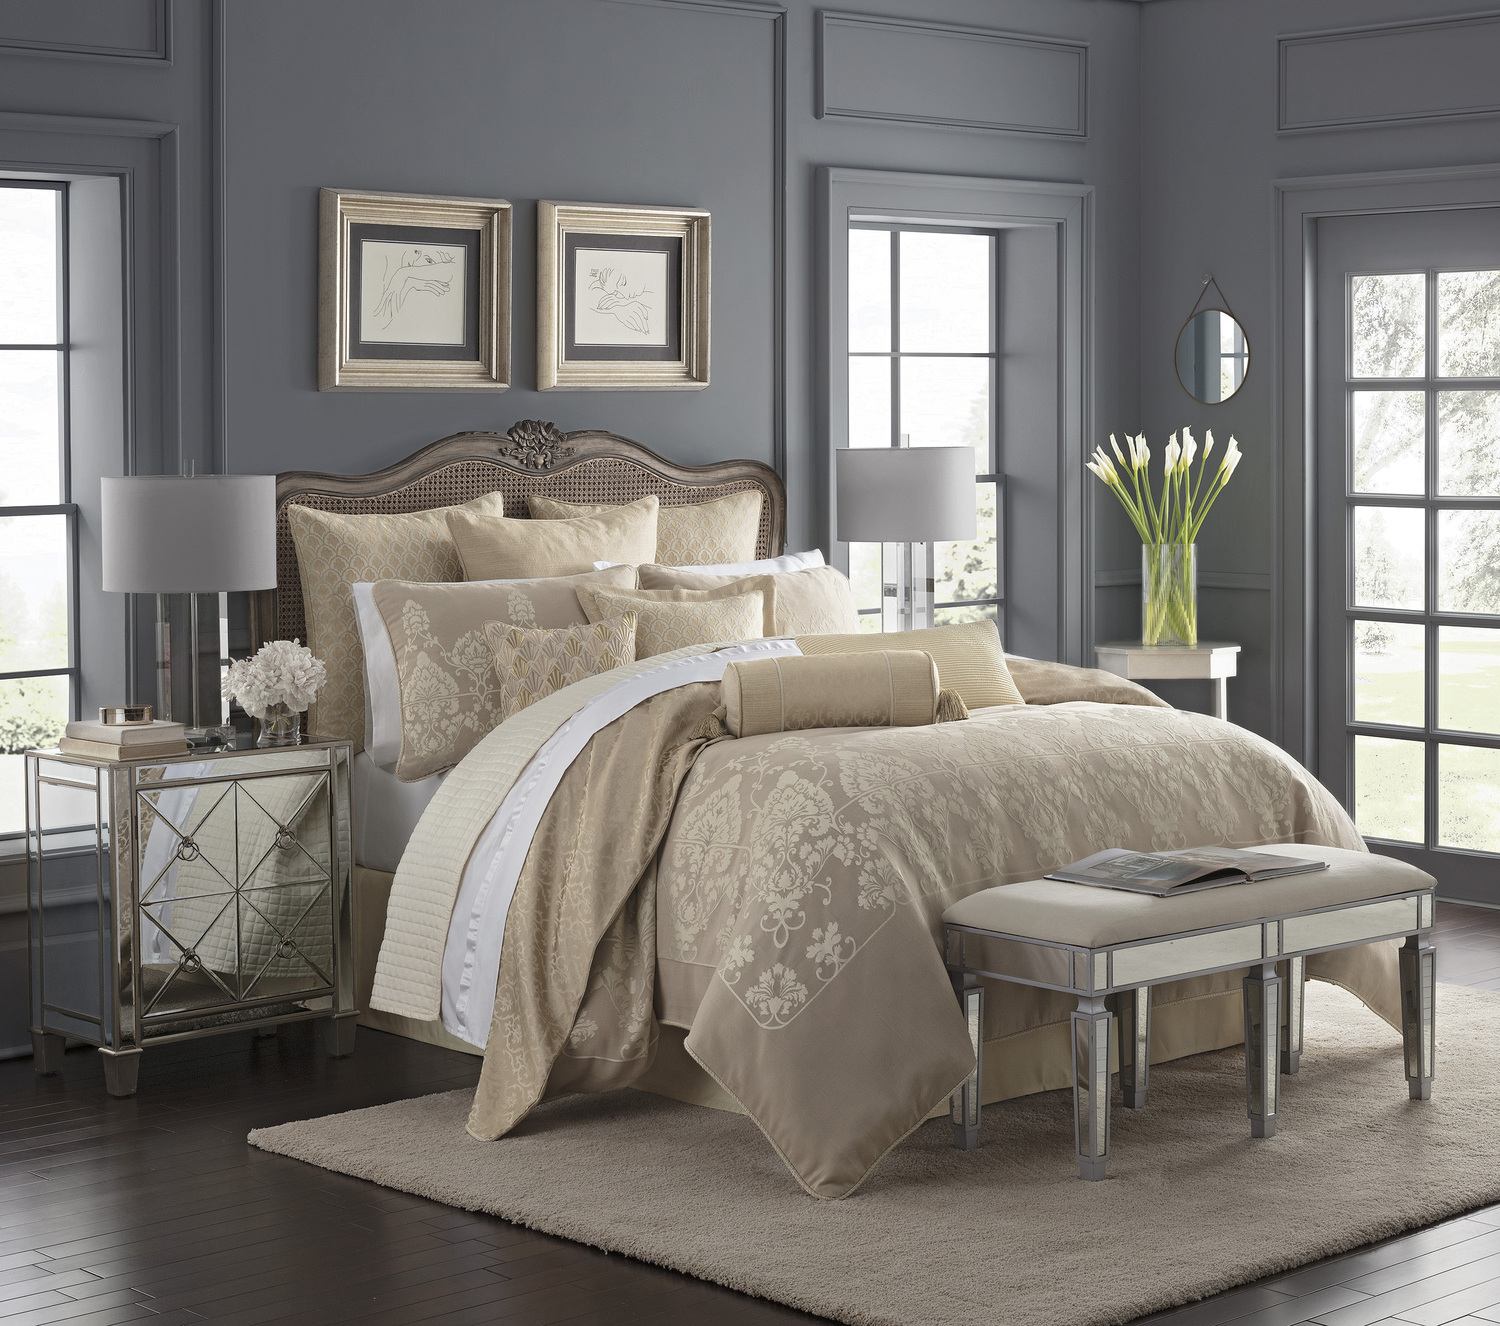 Abrielle by Waterford Luxury Bedding